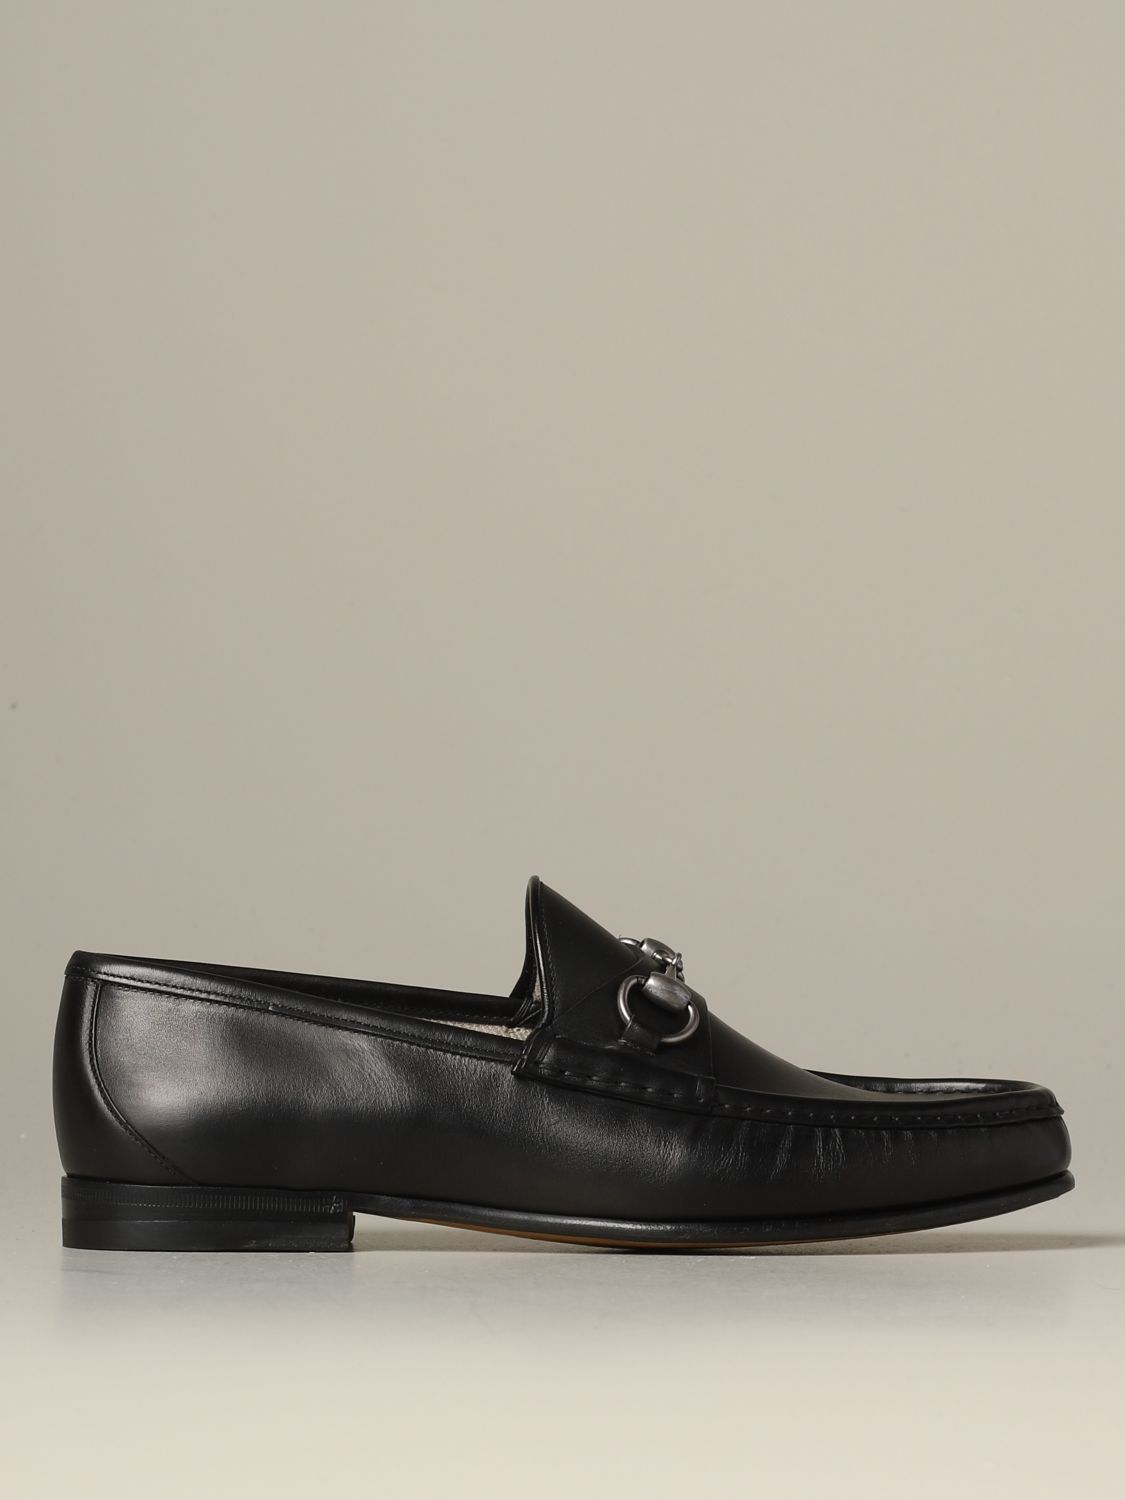 gucci roos loafer